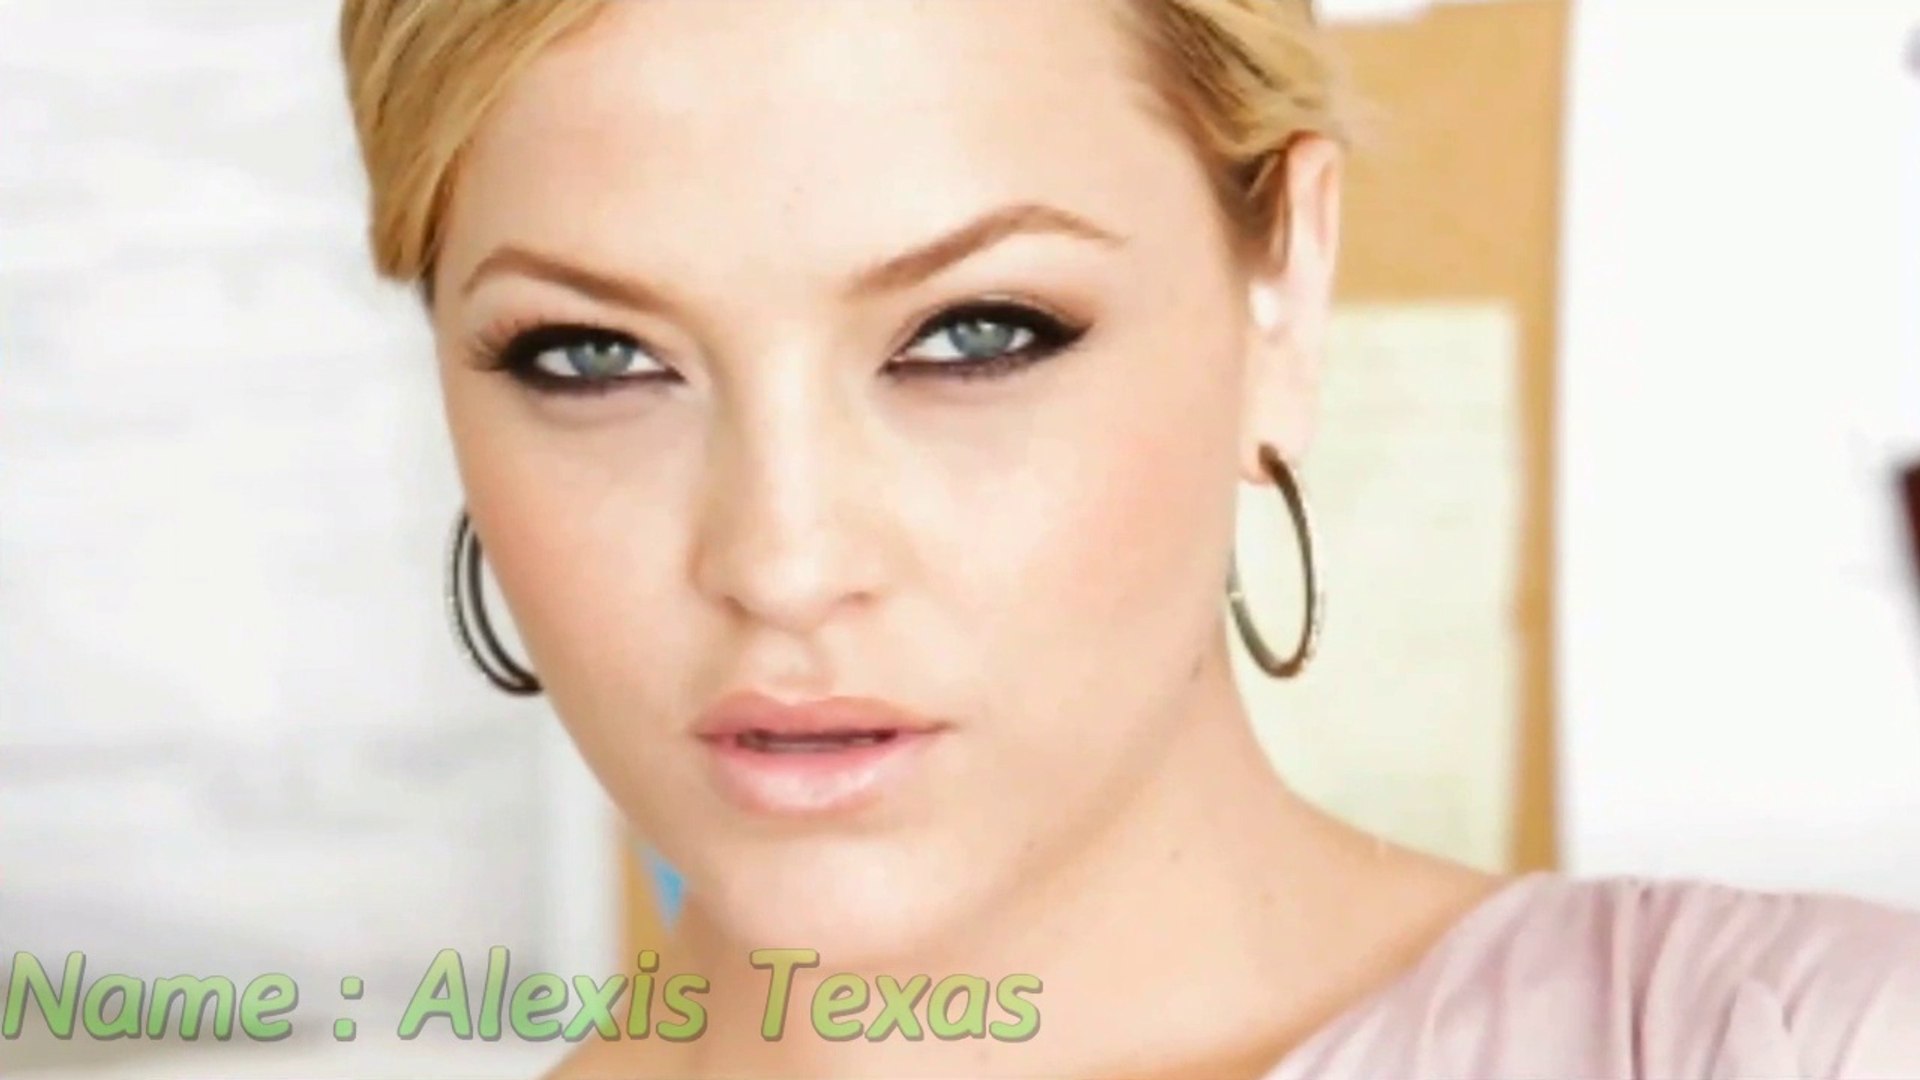 Who is alexis texas